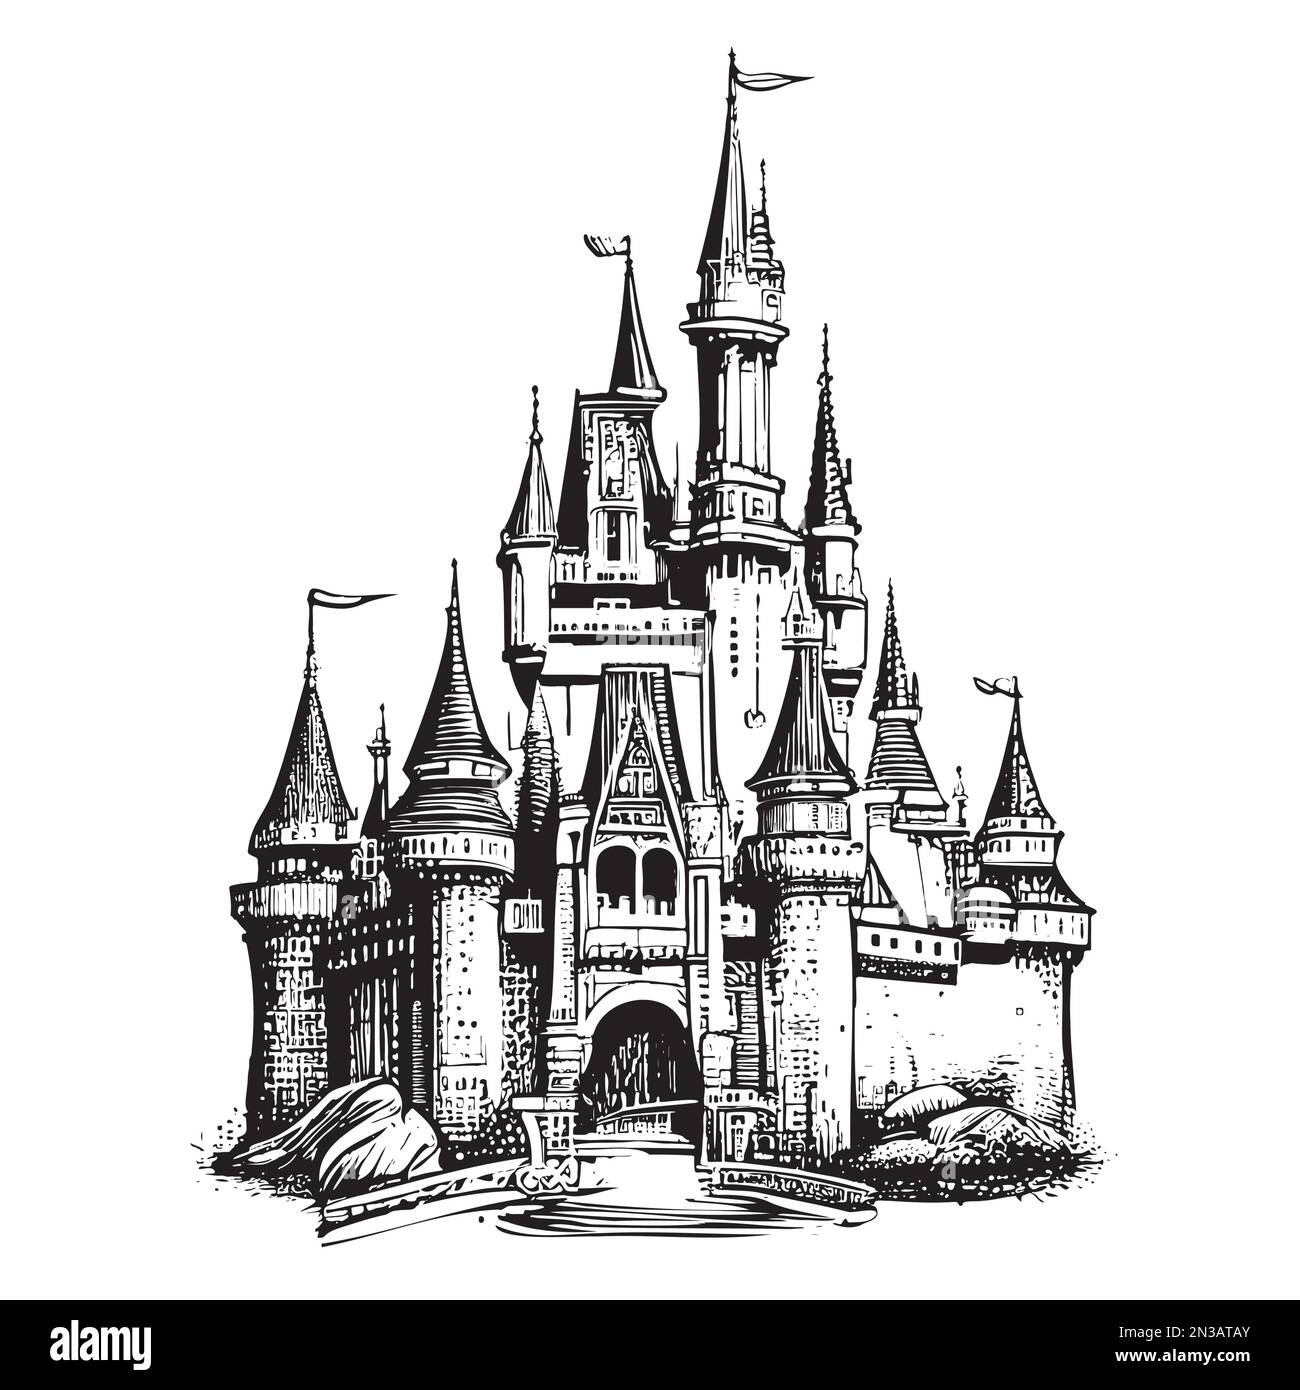 Castle middle ages sketch hand drawn illustration Stock Vector